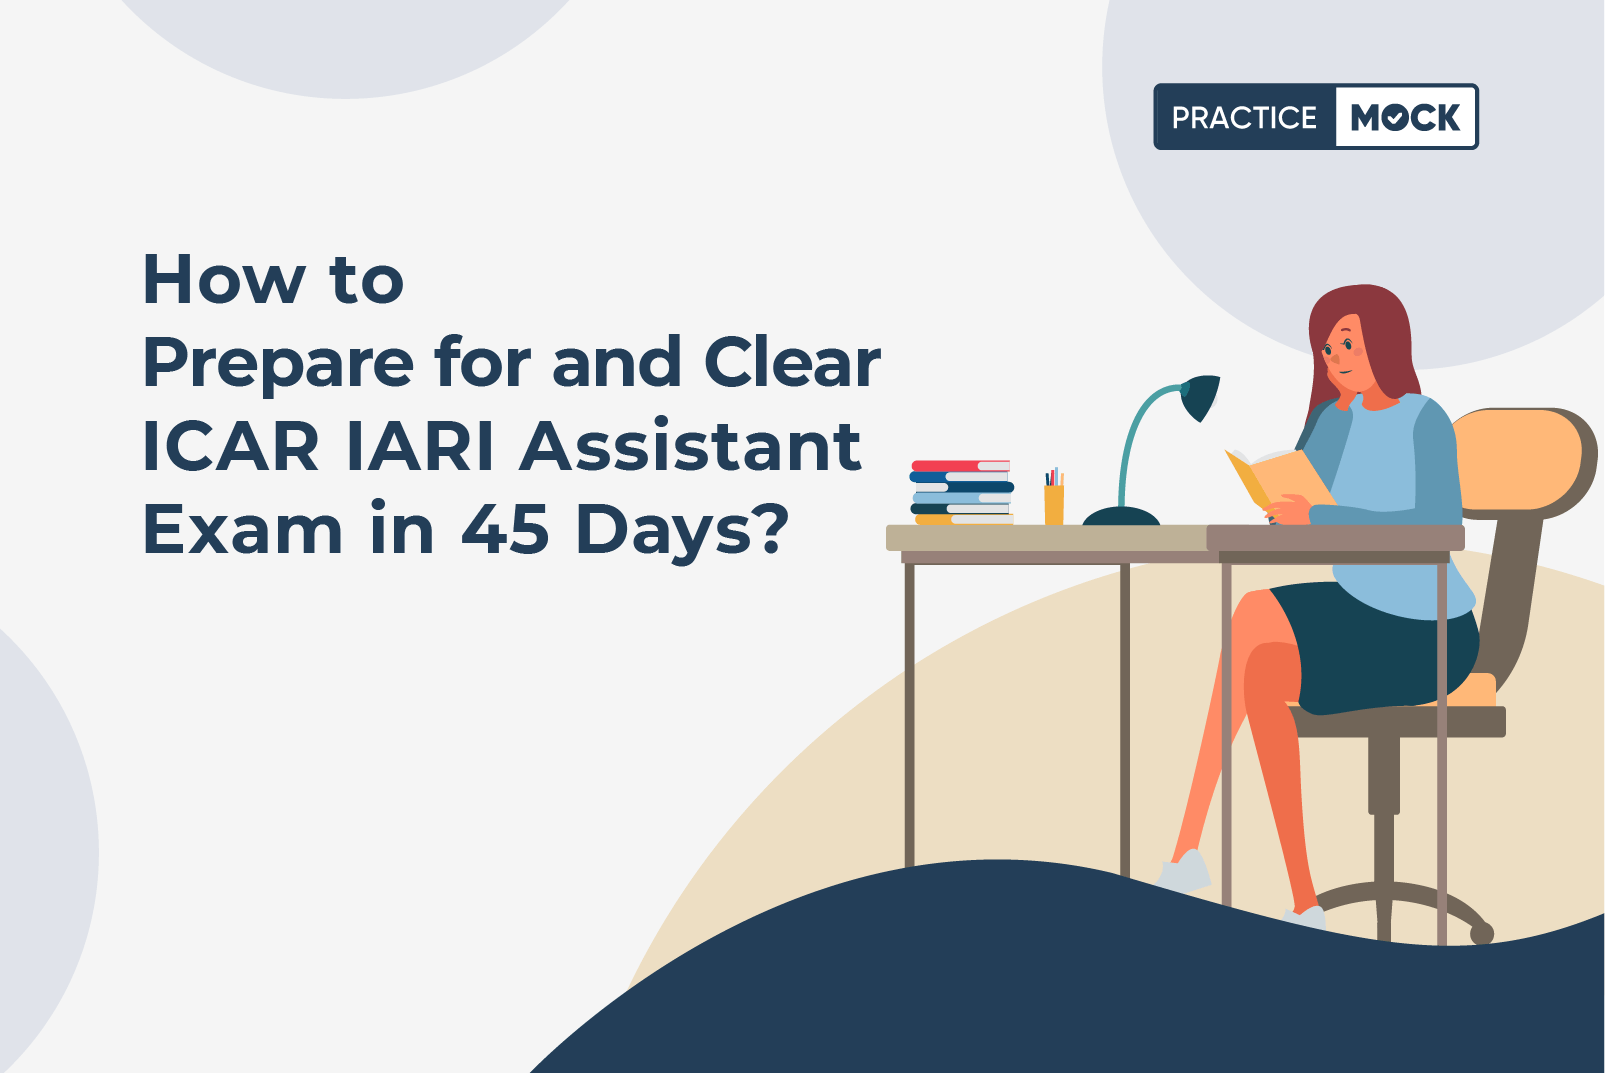 How to Prepare for and Clear ICAR IARI Assistant Exam in 45 Days?